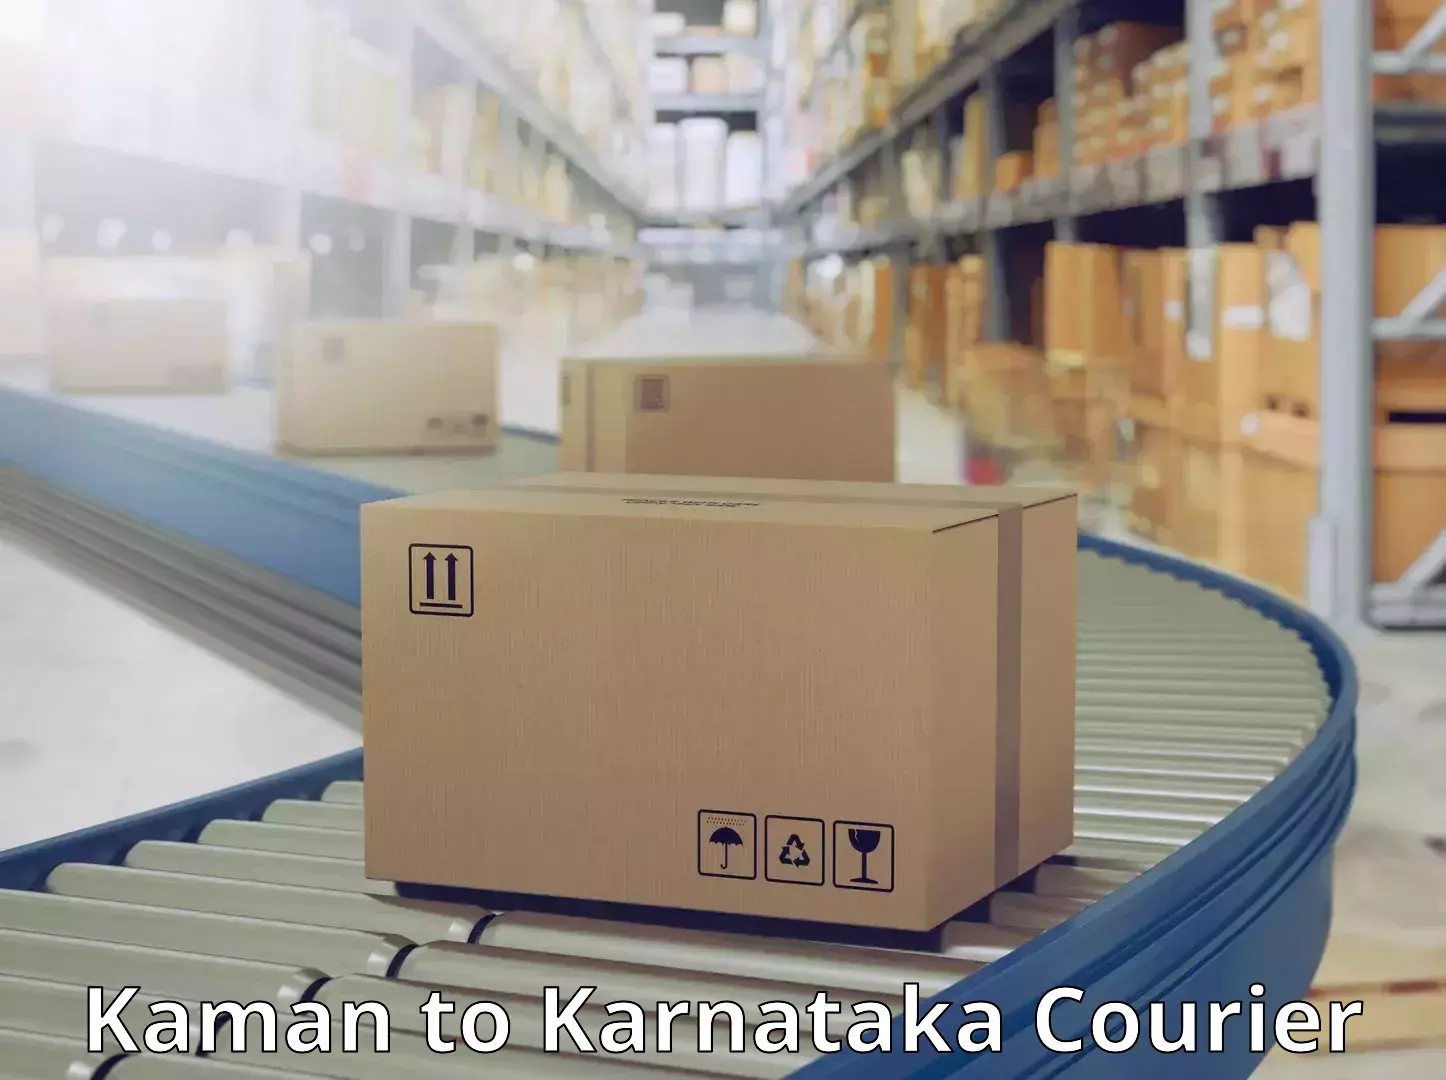 Multi-carrier shipping in Kaman to Mysore